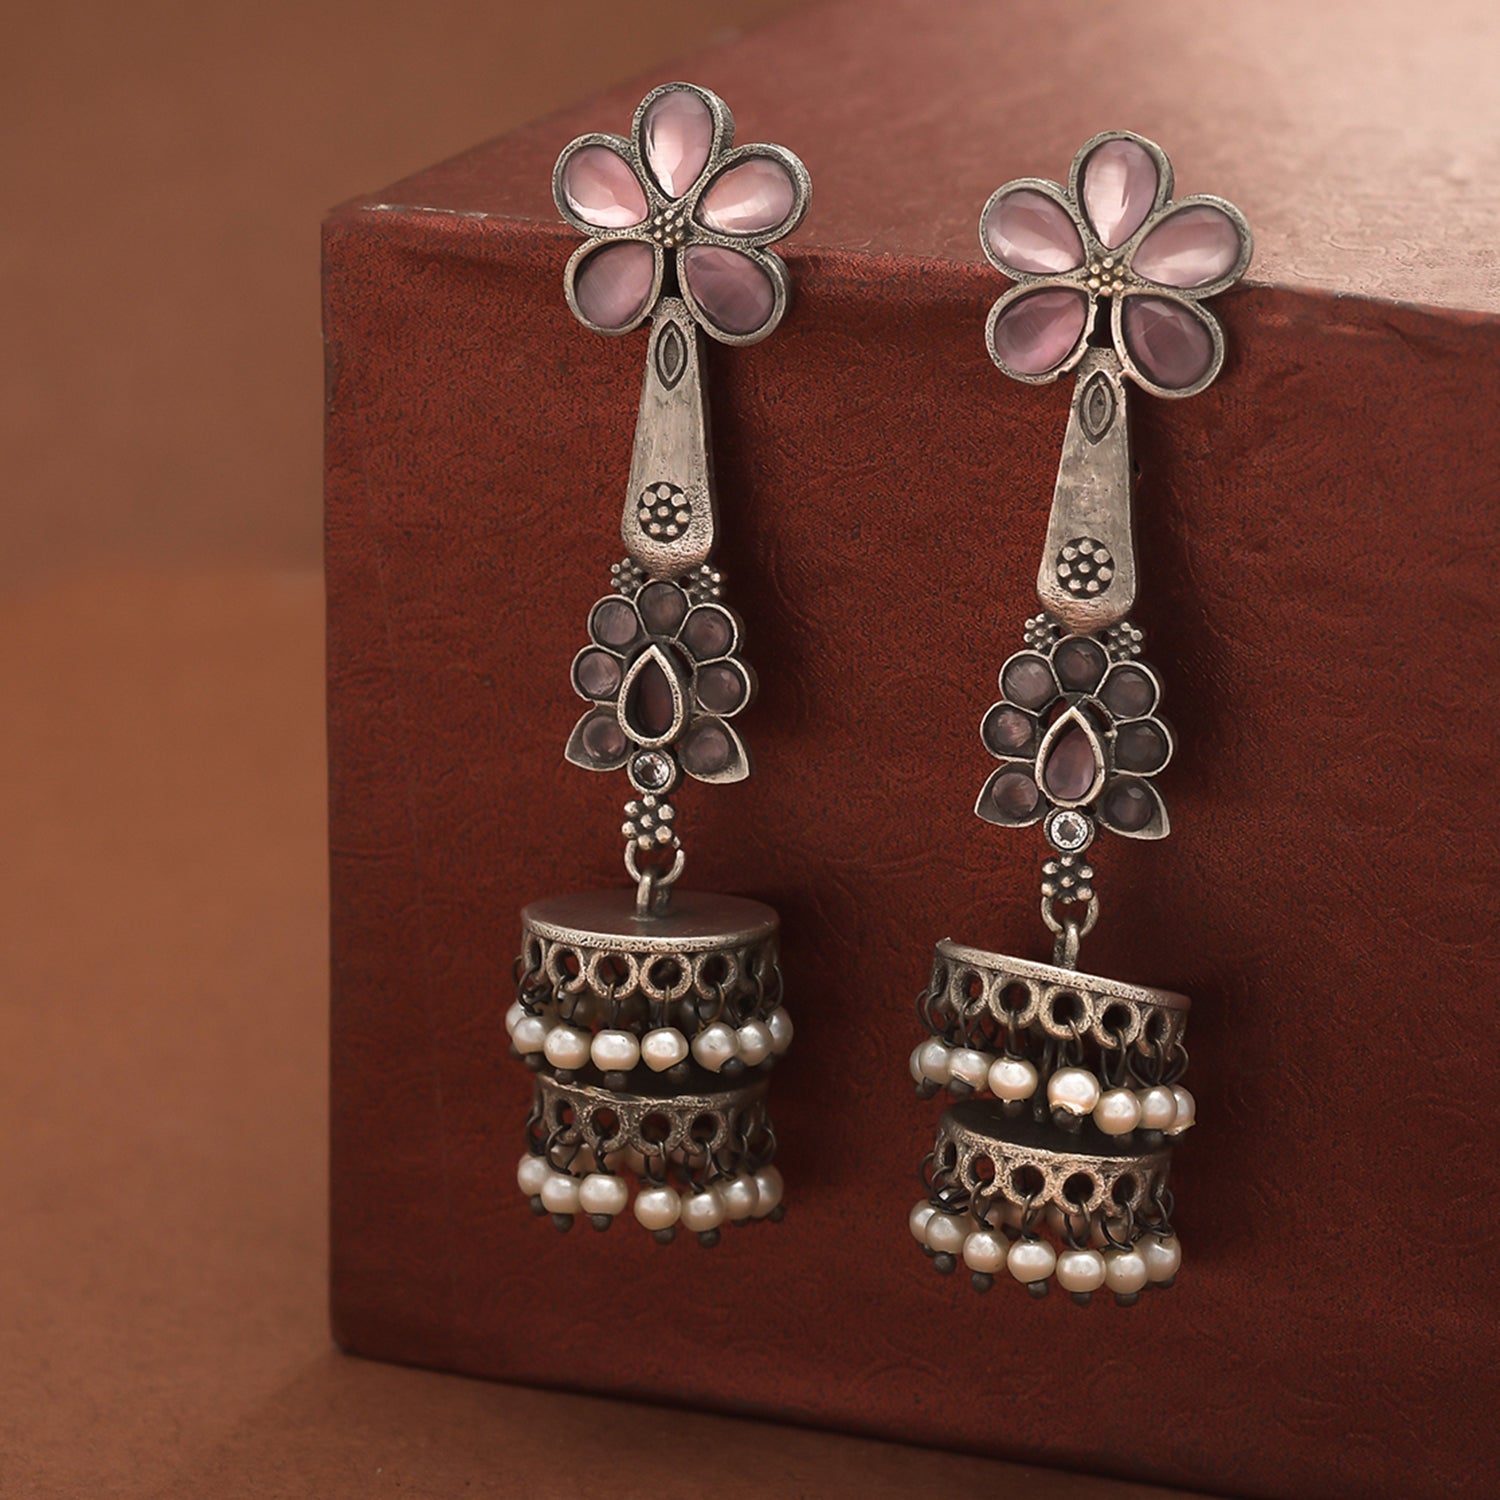 Antique Elegance Silver Plated Floral Drop Earrings